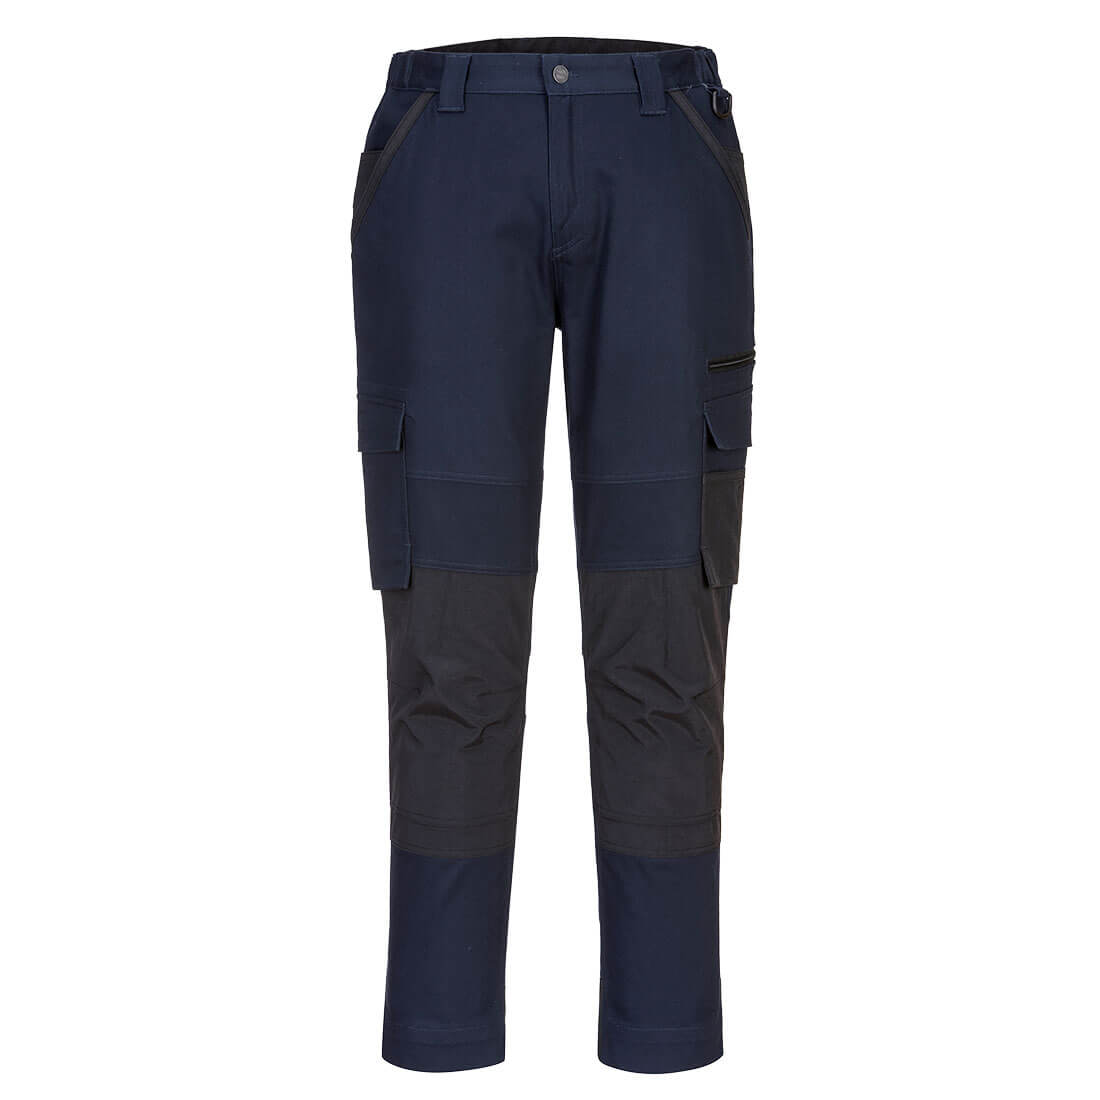 Slim Fit Stretch Trade Pants Navy - MP707 Front